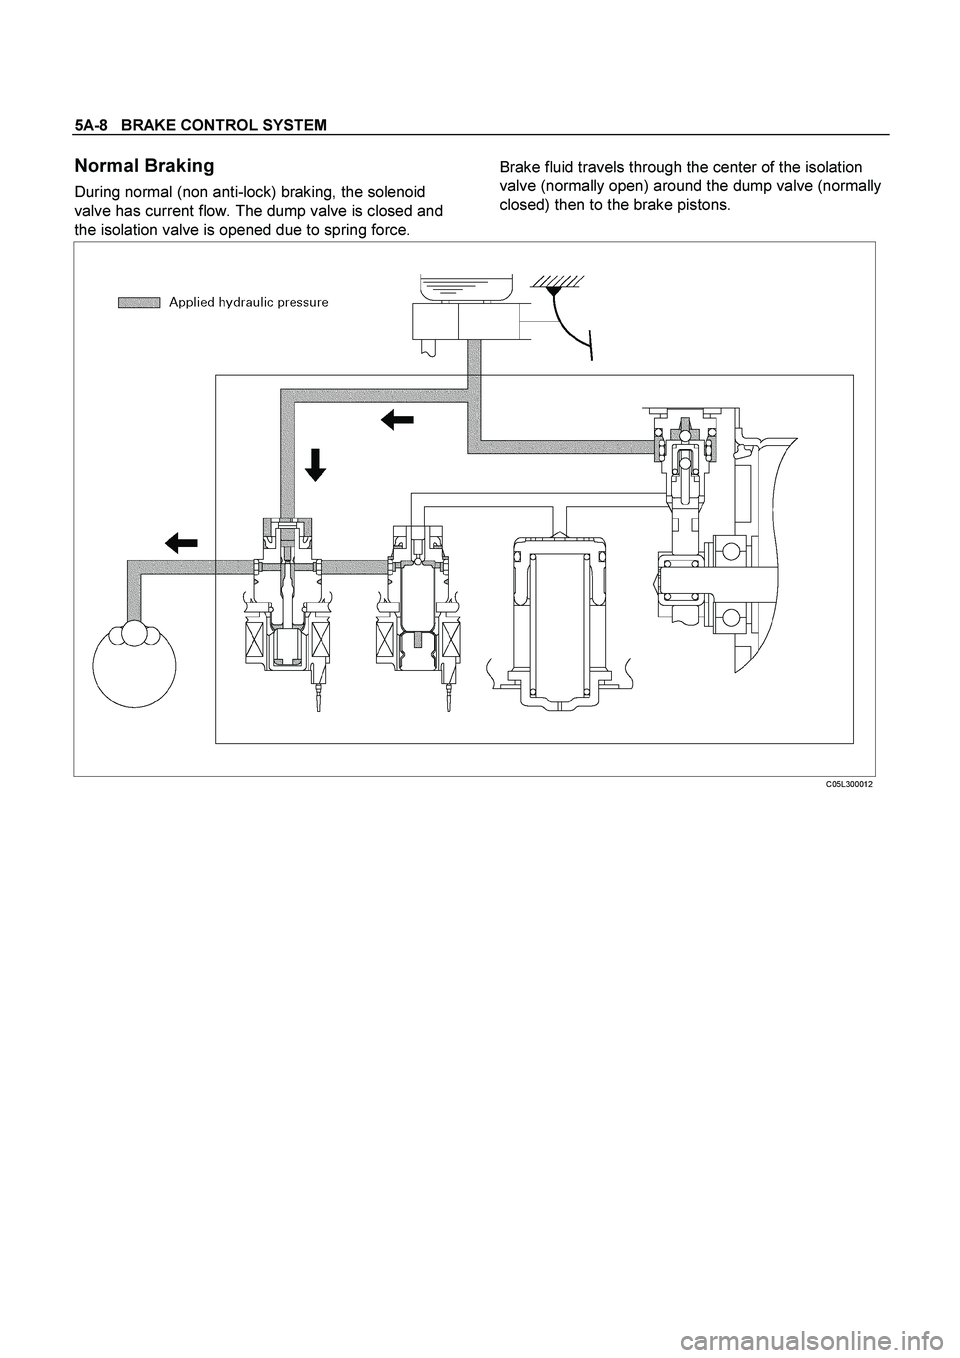 ISUZU TF SERIES 2004  Workshop Manual 5A-8   BRAKE CONTROL SYSTEM
 
Normal Braking 
During normal (non anti-lock) braking, the solenoid 
valve has current flow. The dump valve is closed and 
the isolation valve is opened due to spring for